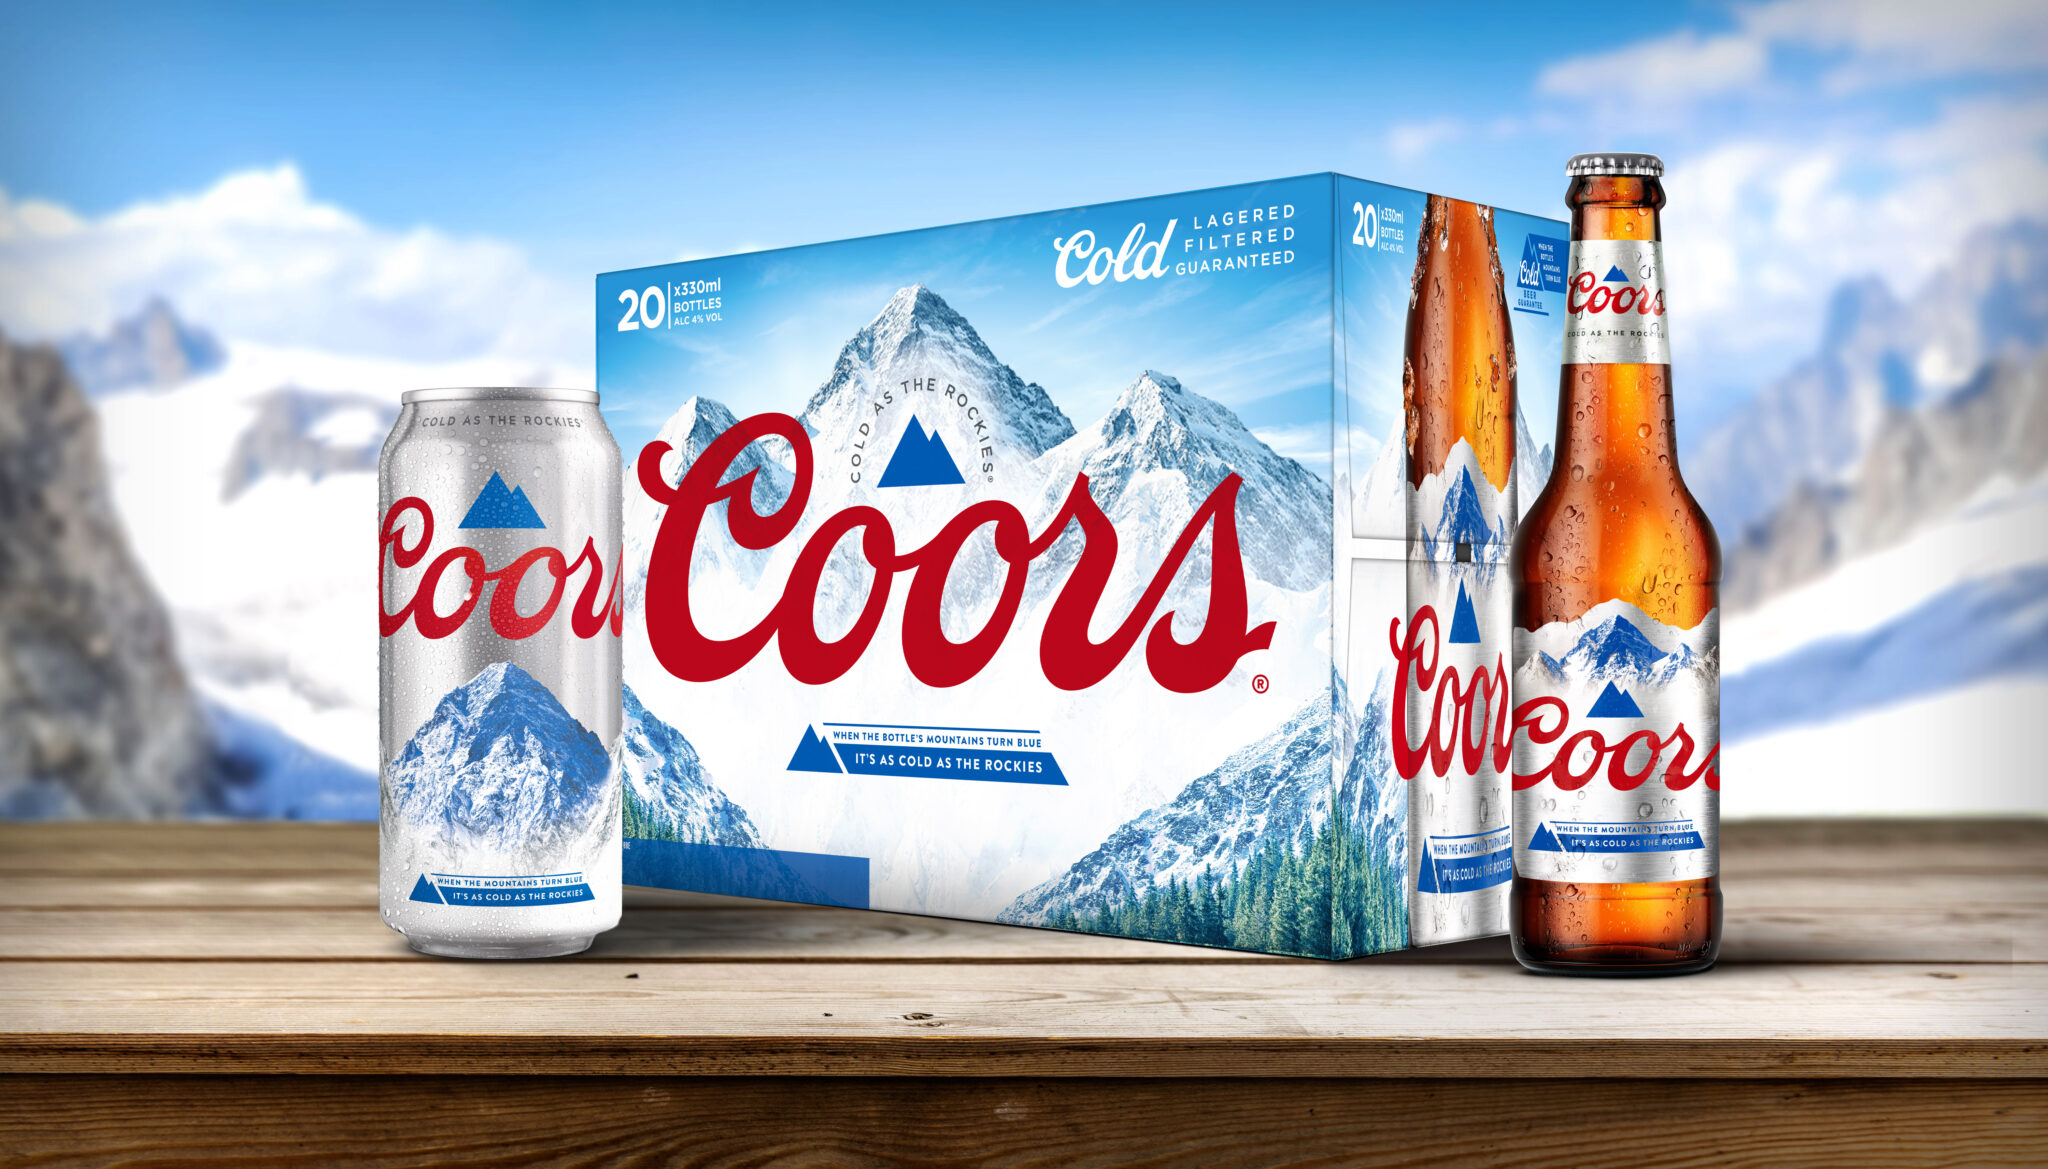 molson-coors-to-launch-new-marketing-campaign-brand-refresh-and-npd